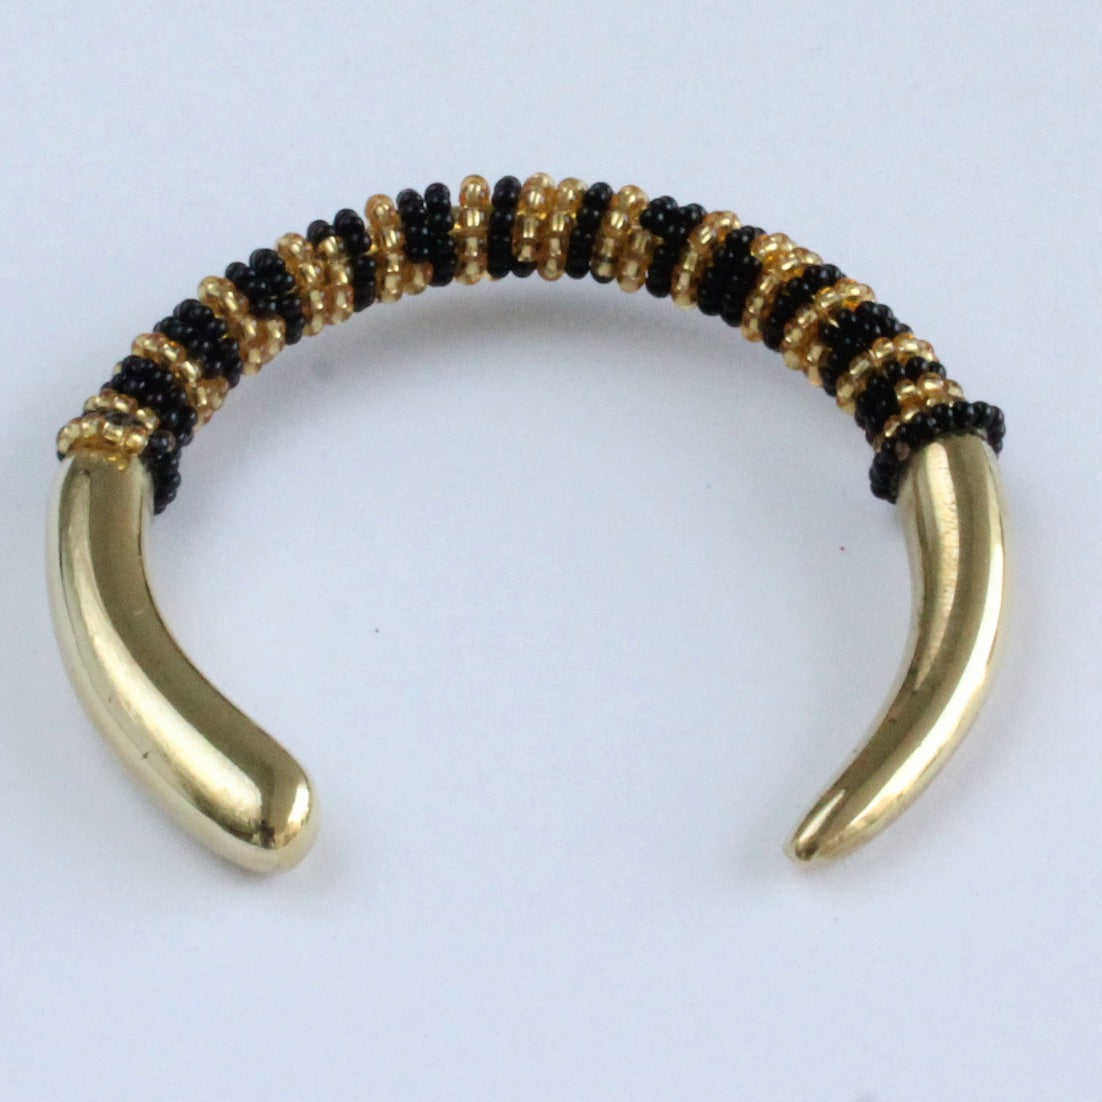 African handmade brass bracelet with black and gold beads